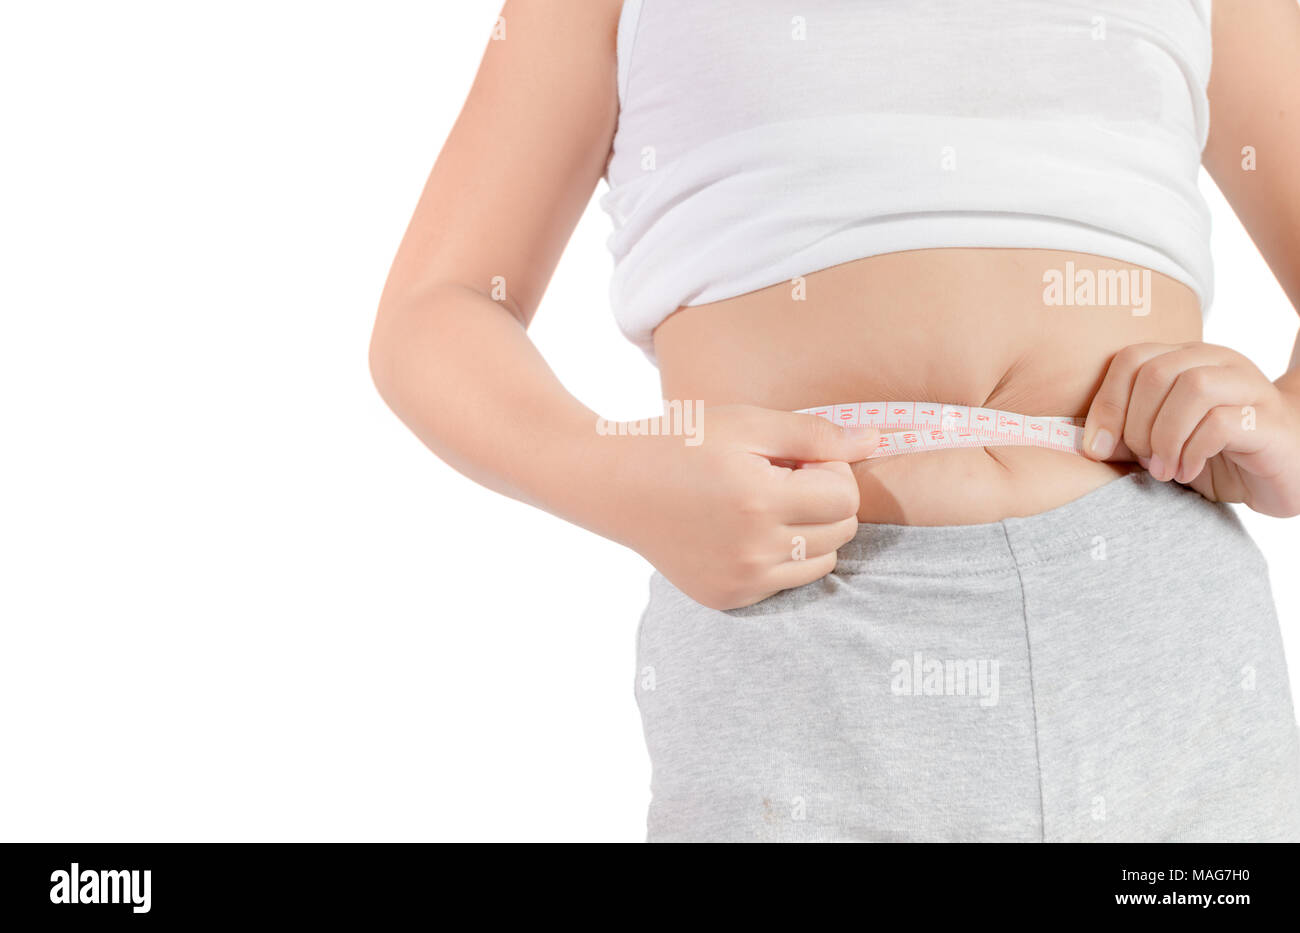 Slimming Woman With A Measuring Tape And Apple. Healthy Lifestyle For  Female. Stock Photo, Picture and Royalty Free Image. Image 21886346.